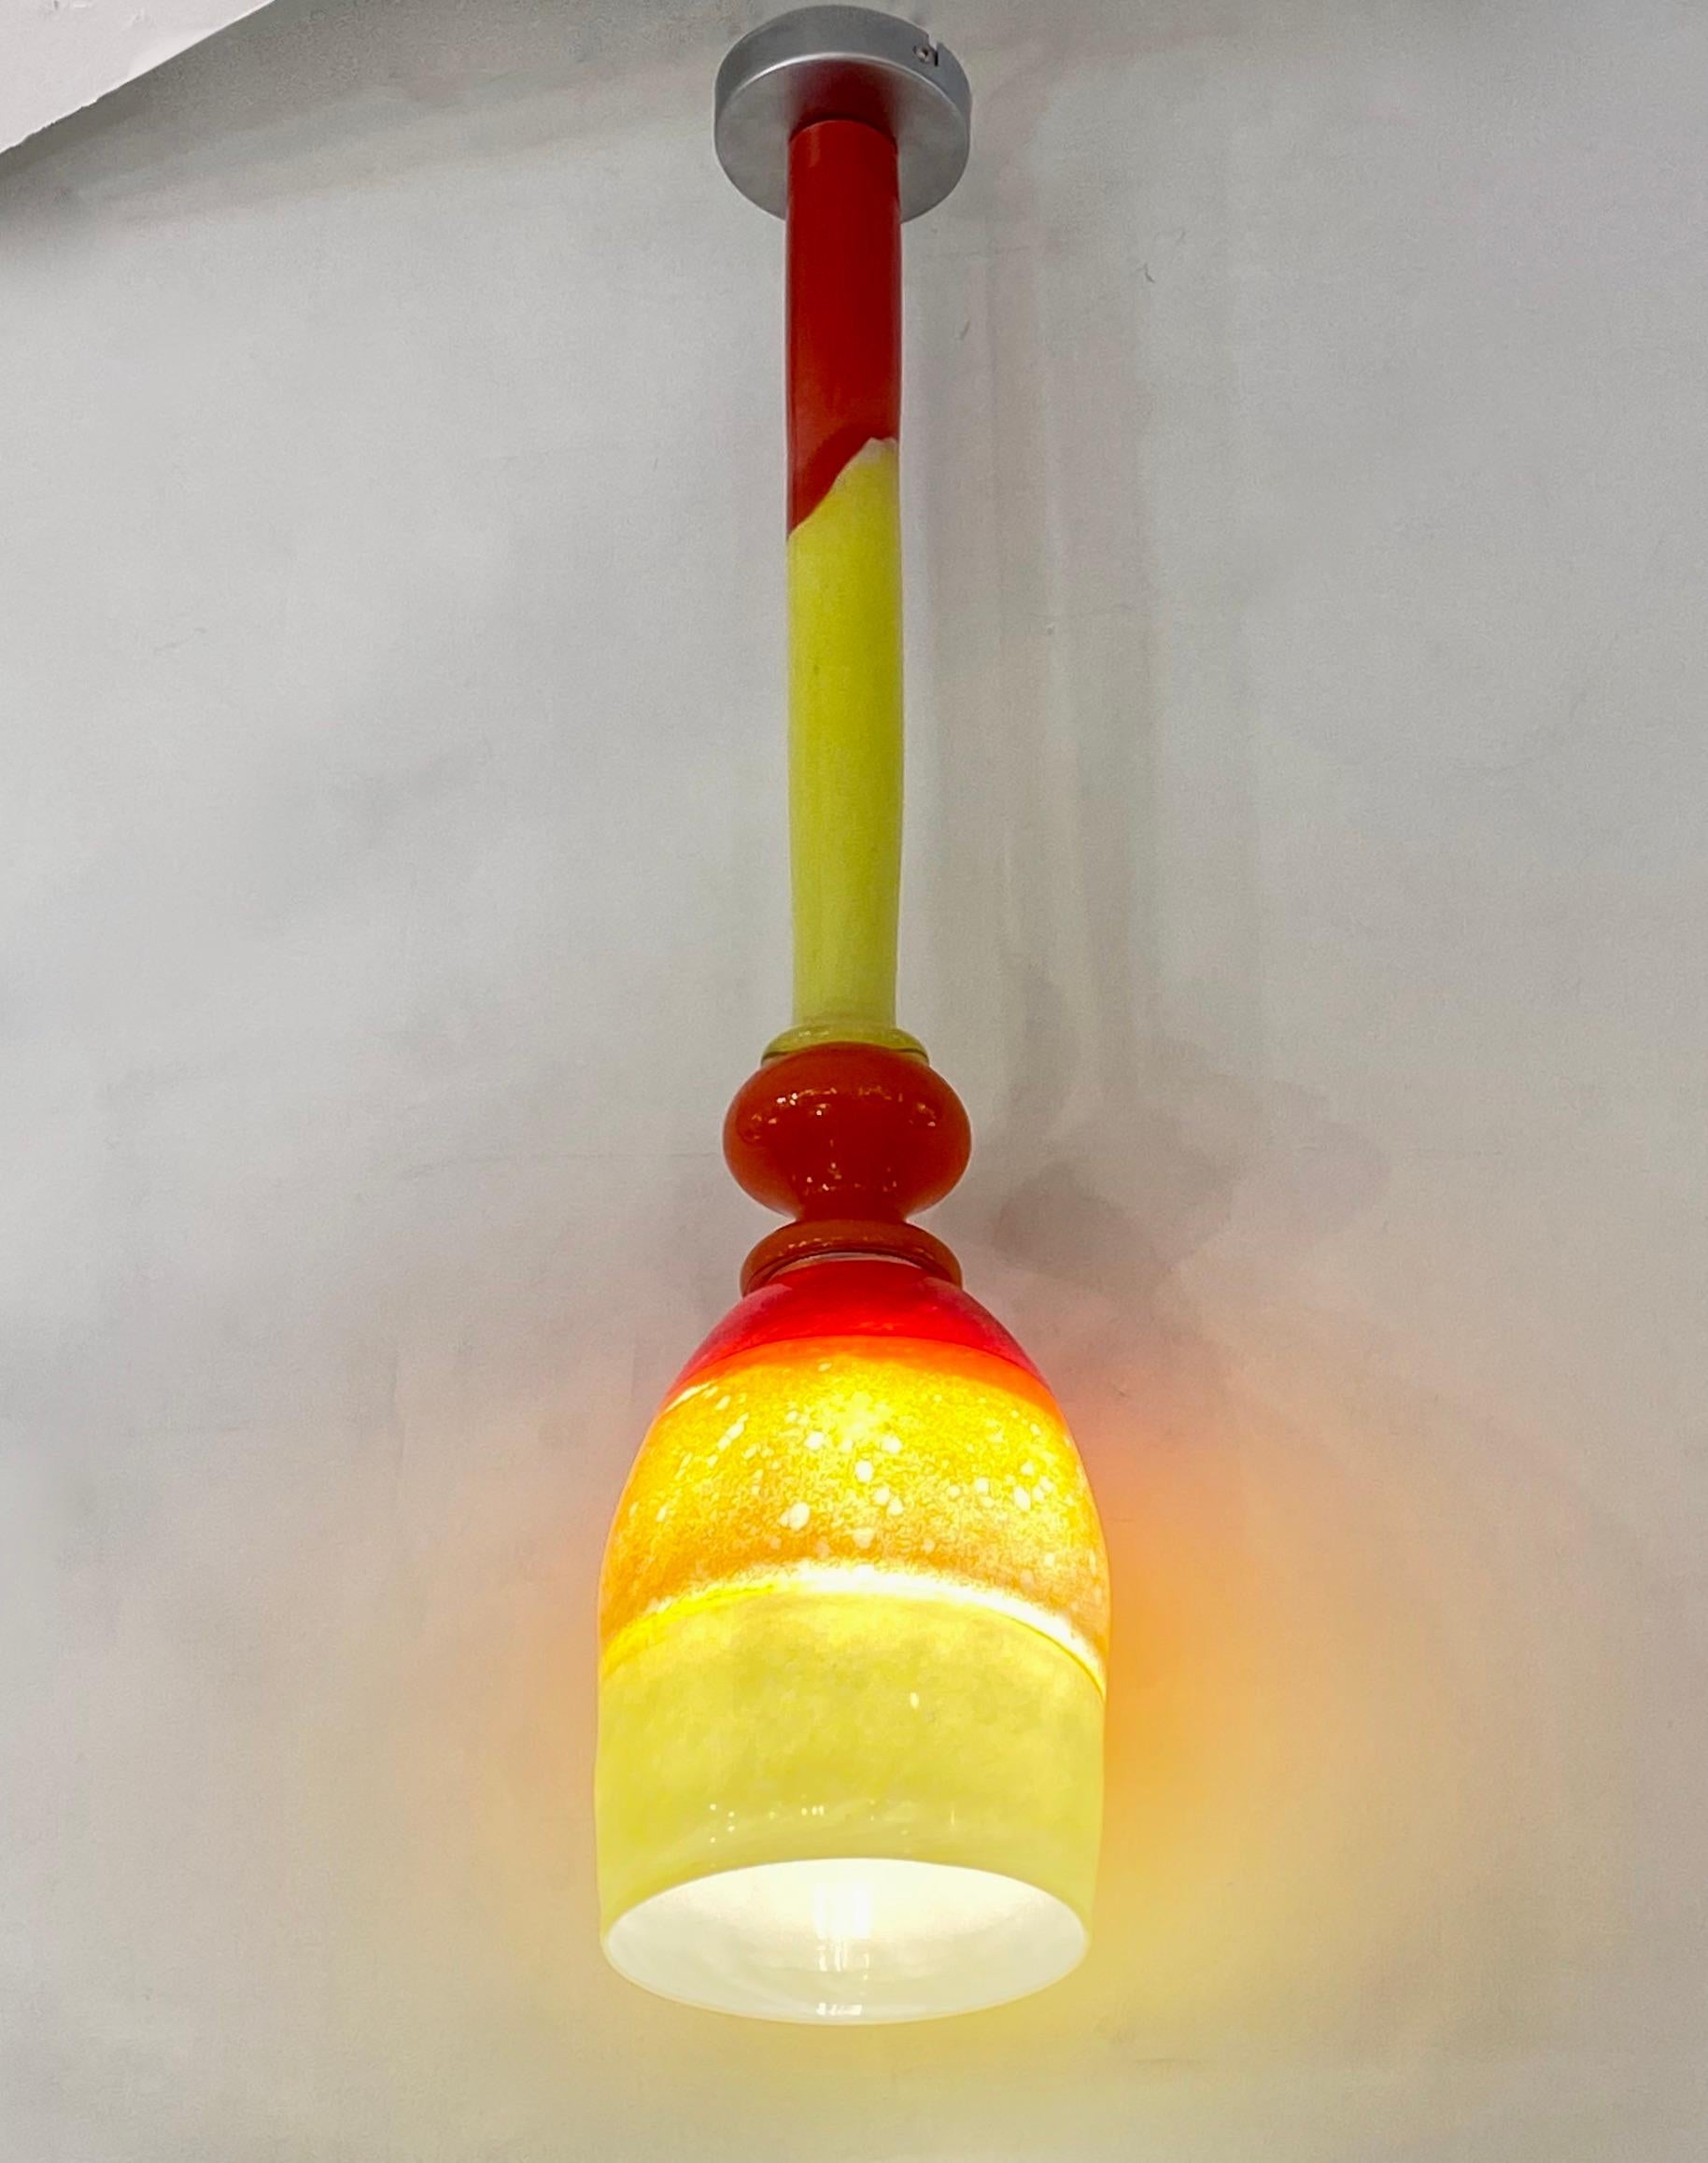 Fun and elegant Italian contemporary custom-made chandelier pendant light, entirely handmade, of organic modern design consisting of a blown Murano glass shade in 3 colors: red, yellow, and orange, fused with the difficult incalmo technique, the